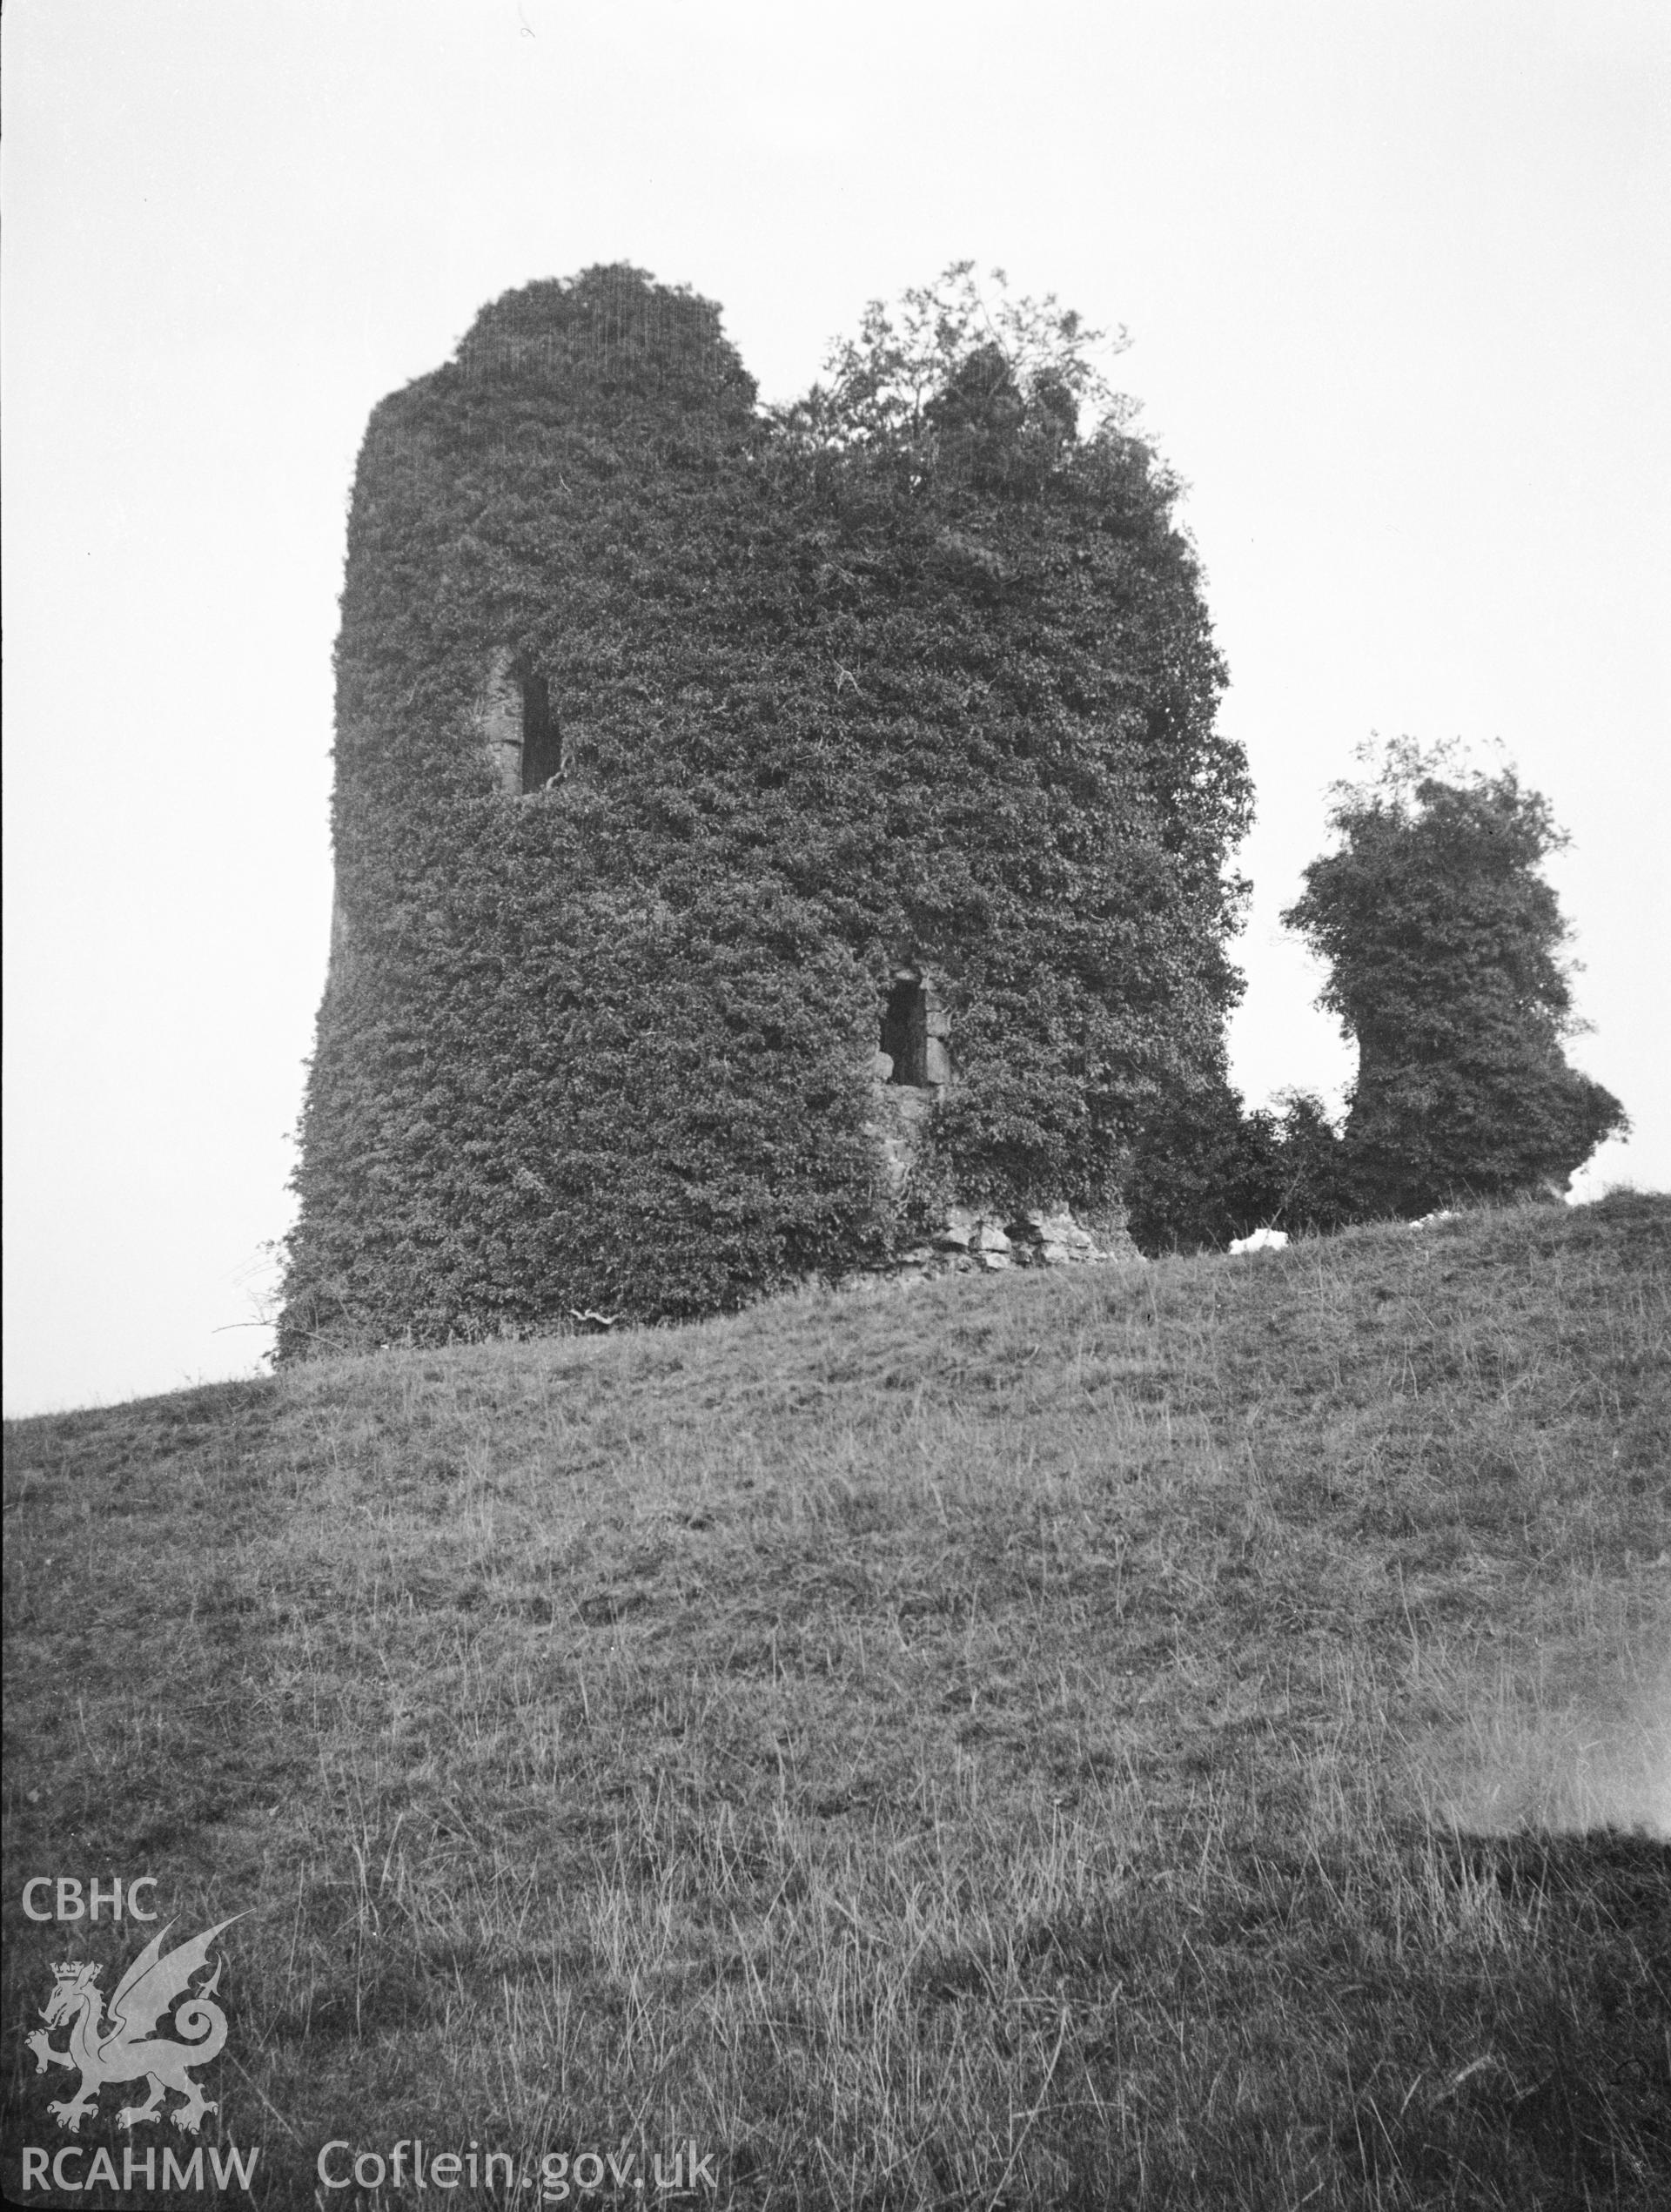 Digital copy of a nitrate negative showing exterior view of ruined circular tower, Narberth Castle. From the National Building Record Postcard Collection.